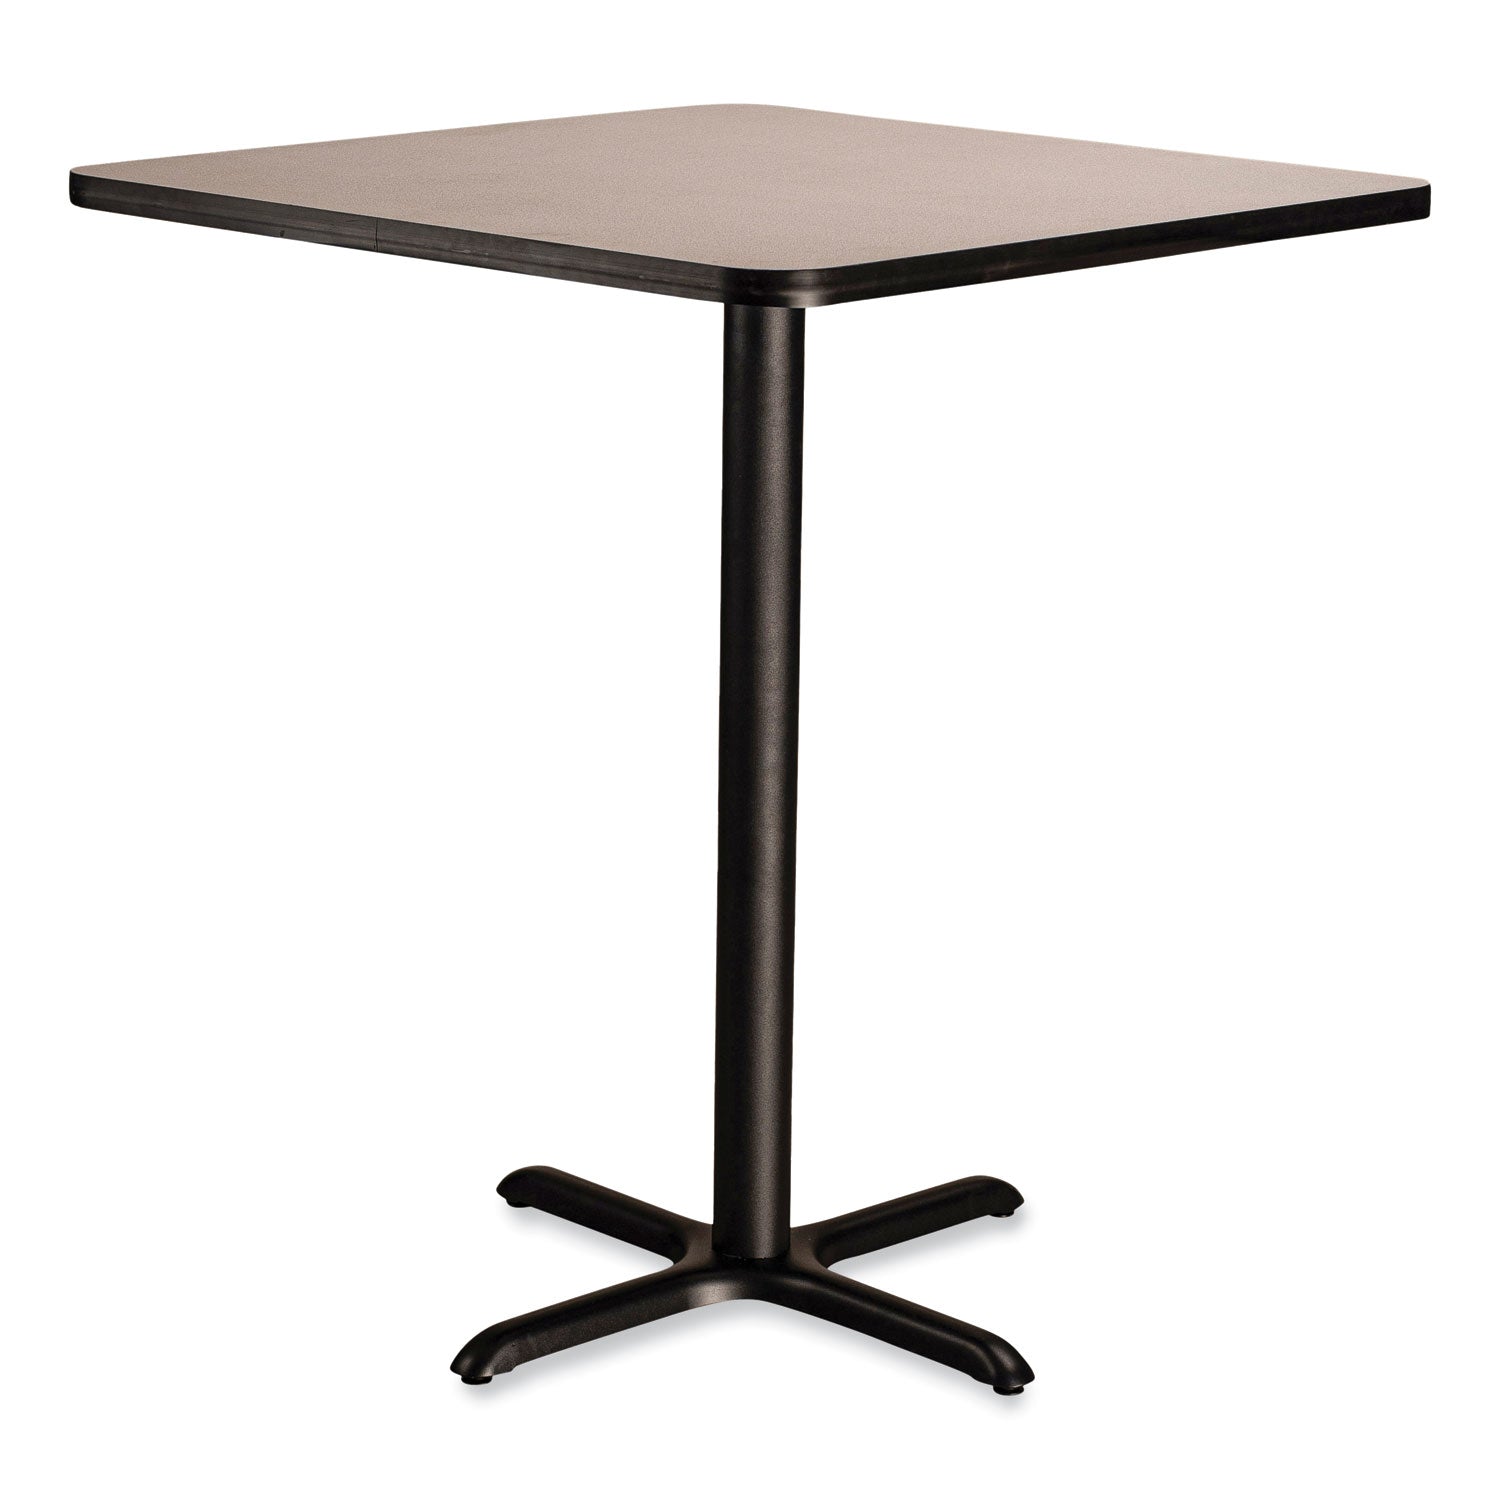 cafe-table-36w-x-36d-x-30h-square-top-x-base-gray-nebula-top-black-base-ships-in-7-10-business-days_npsct33636xd1gy - 1